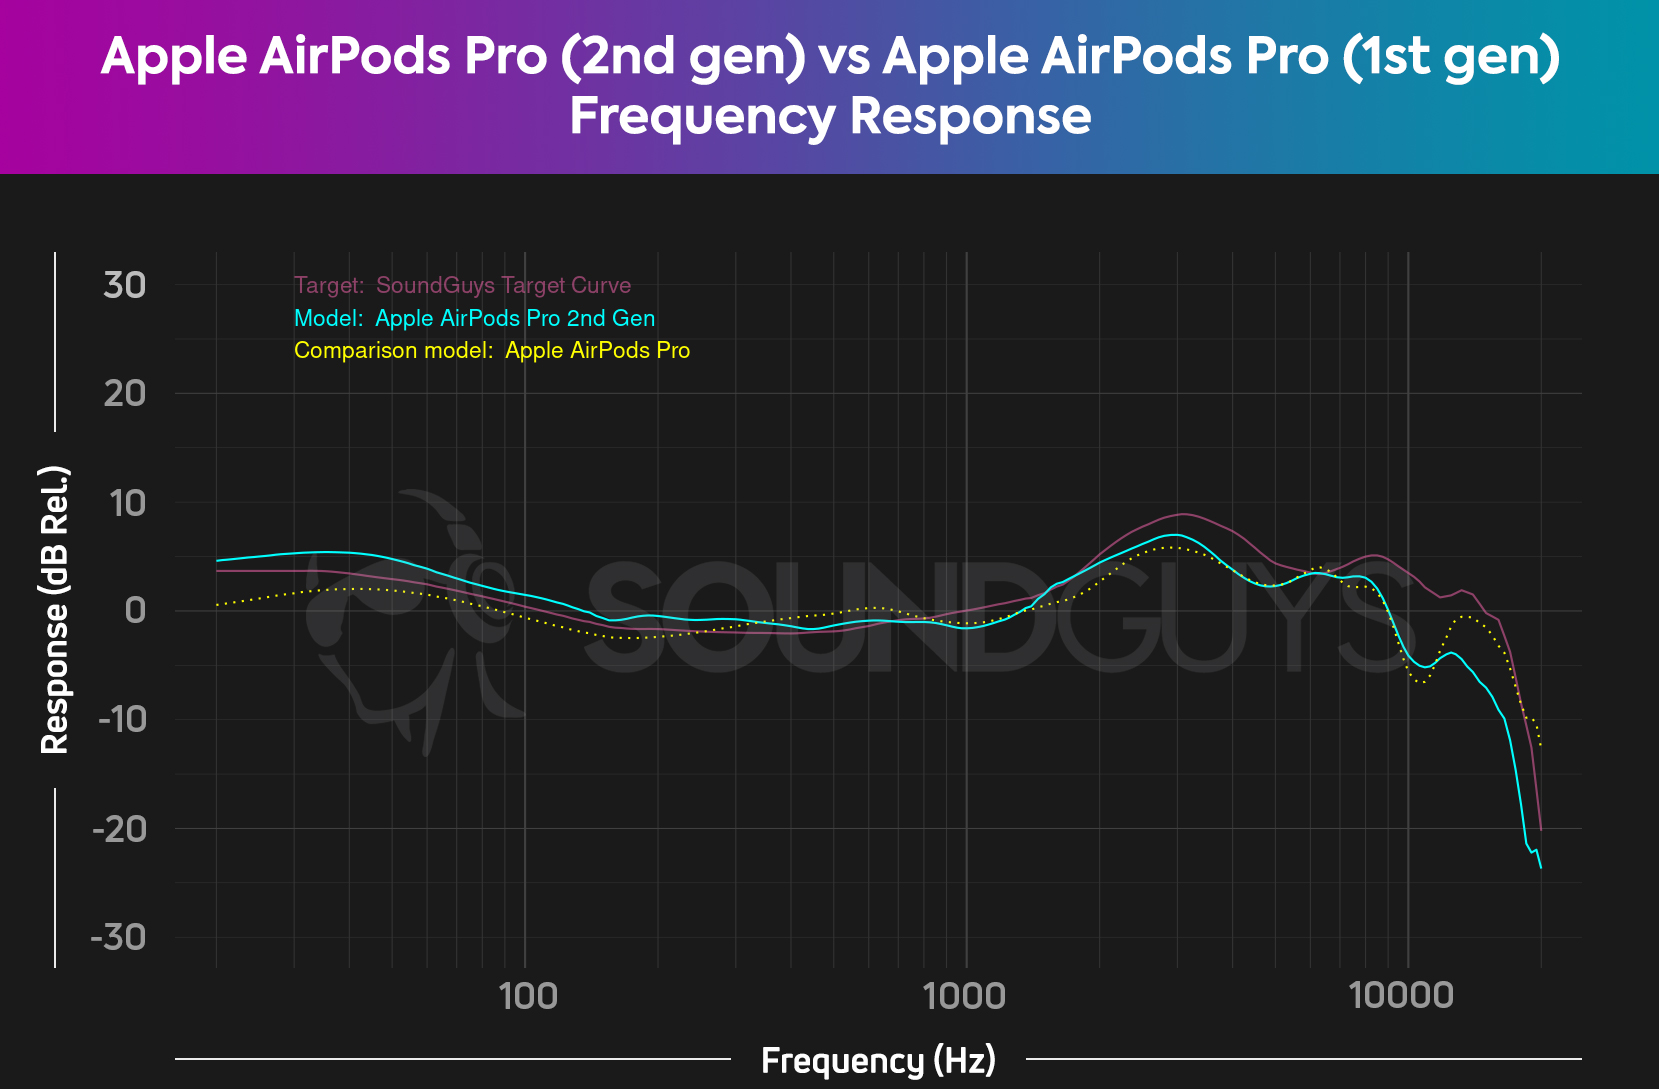 A chart depicts the Apple AirPods Pro (2nd generation) and AirPods Pro (1st generation) frequency responses, revealing the newer pair has a louder bass response.